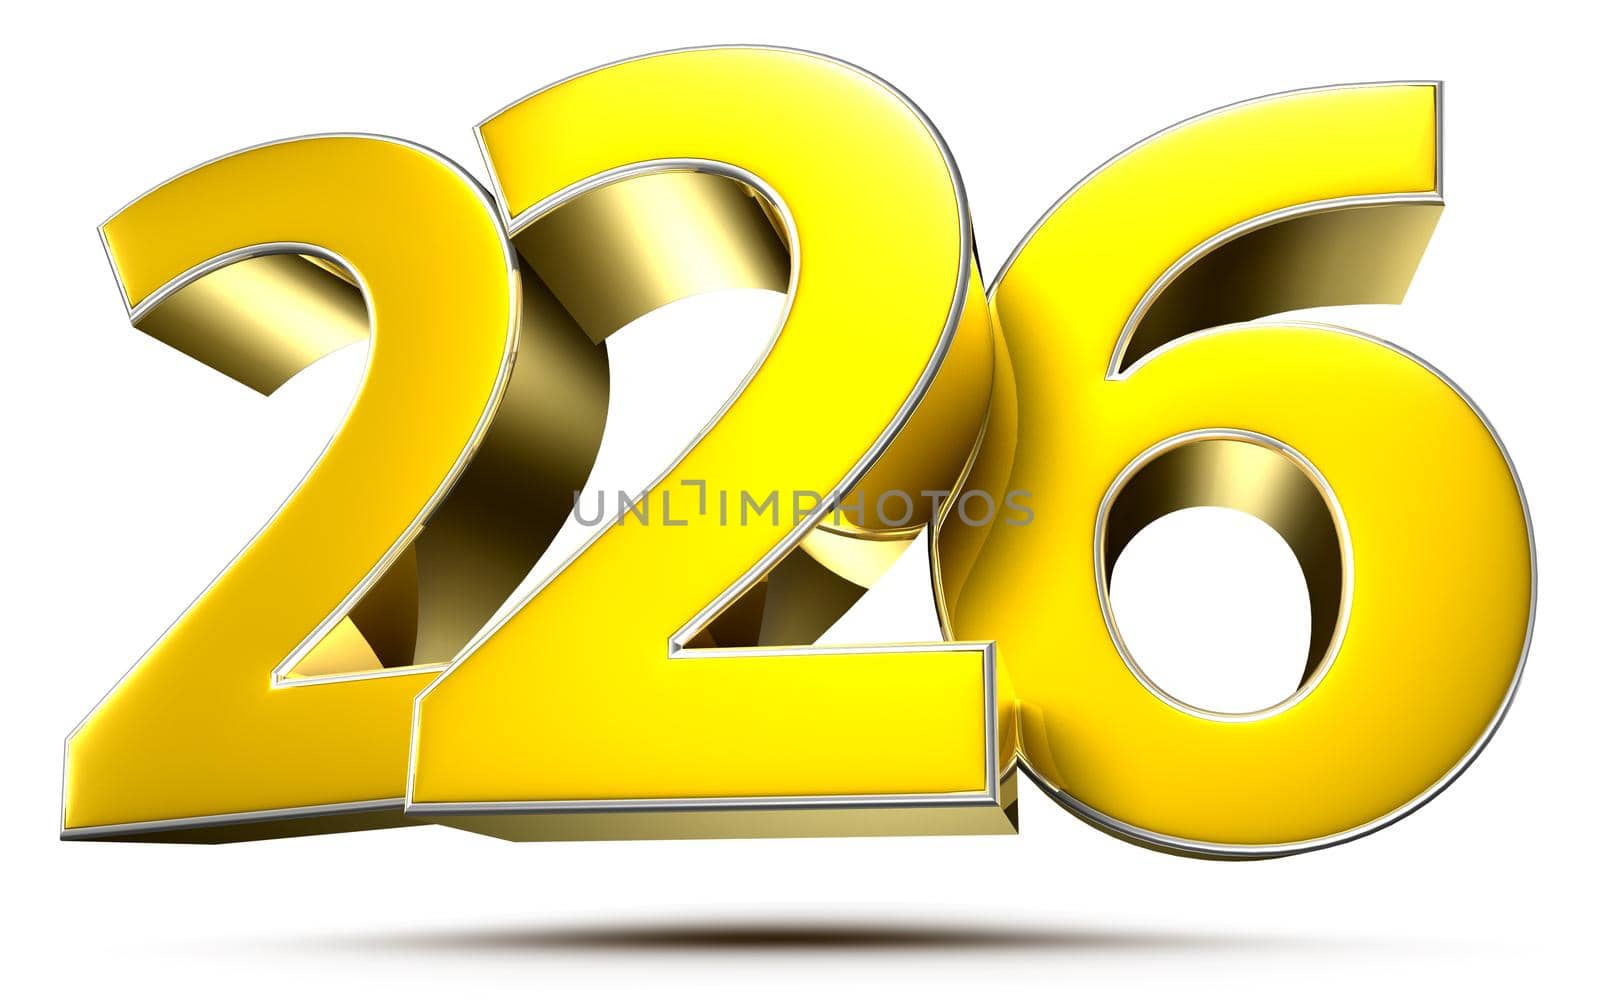 226 gold 3D illustration on white background with clipping path.